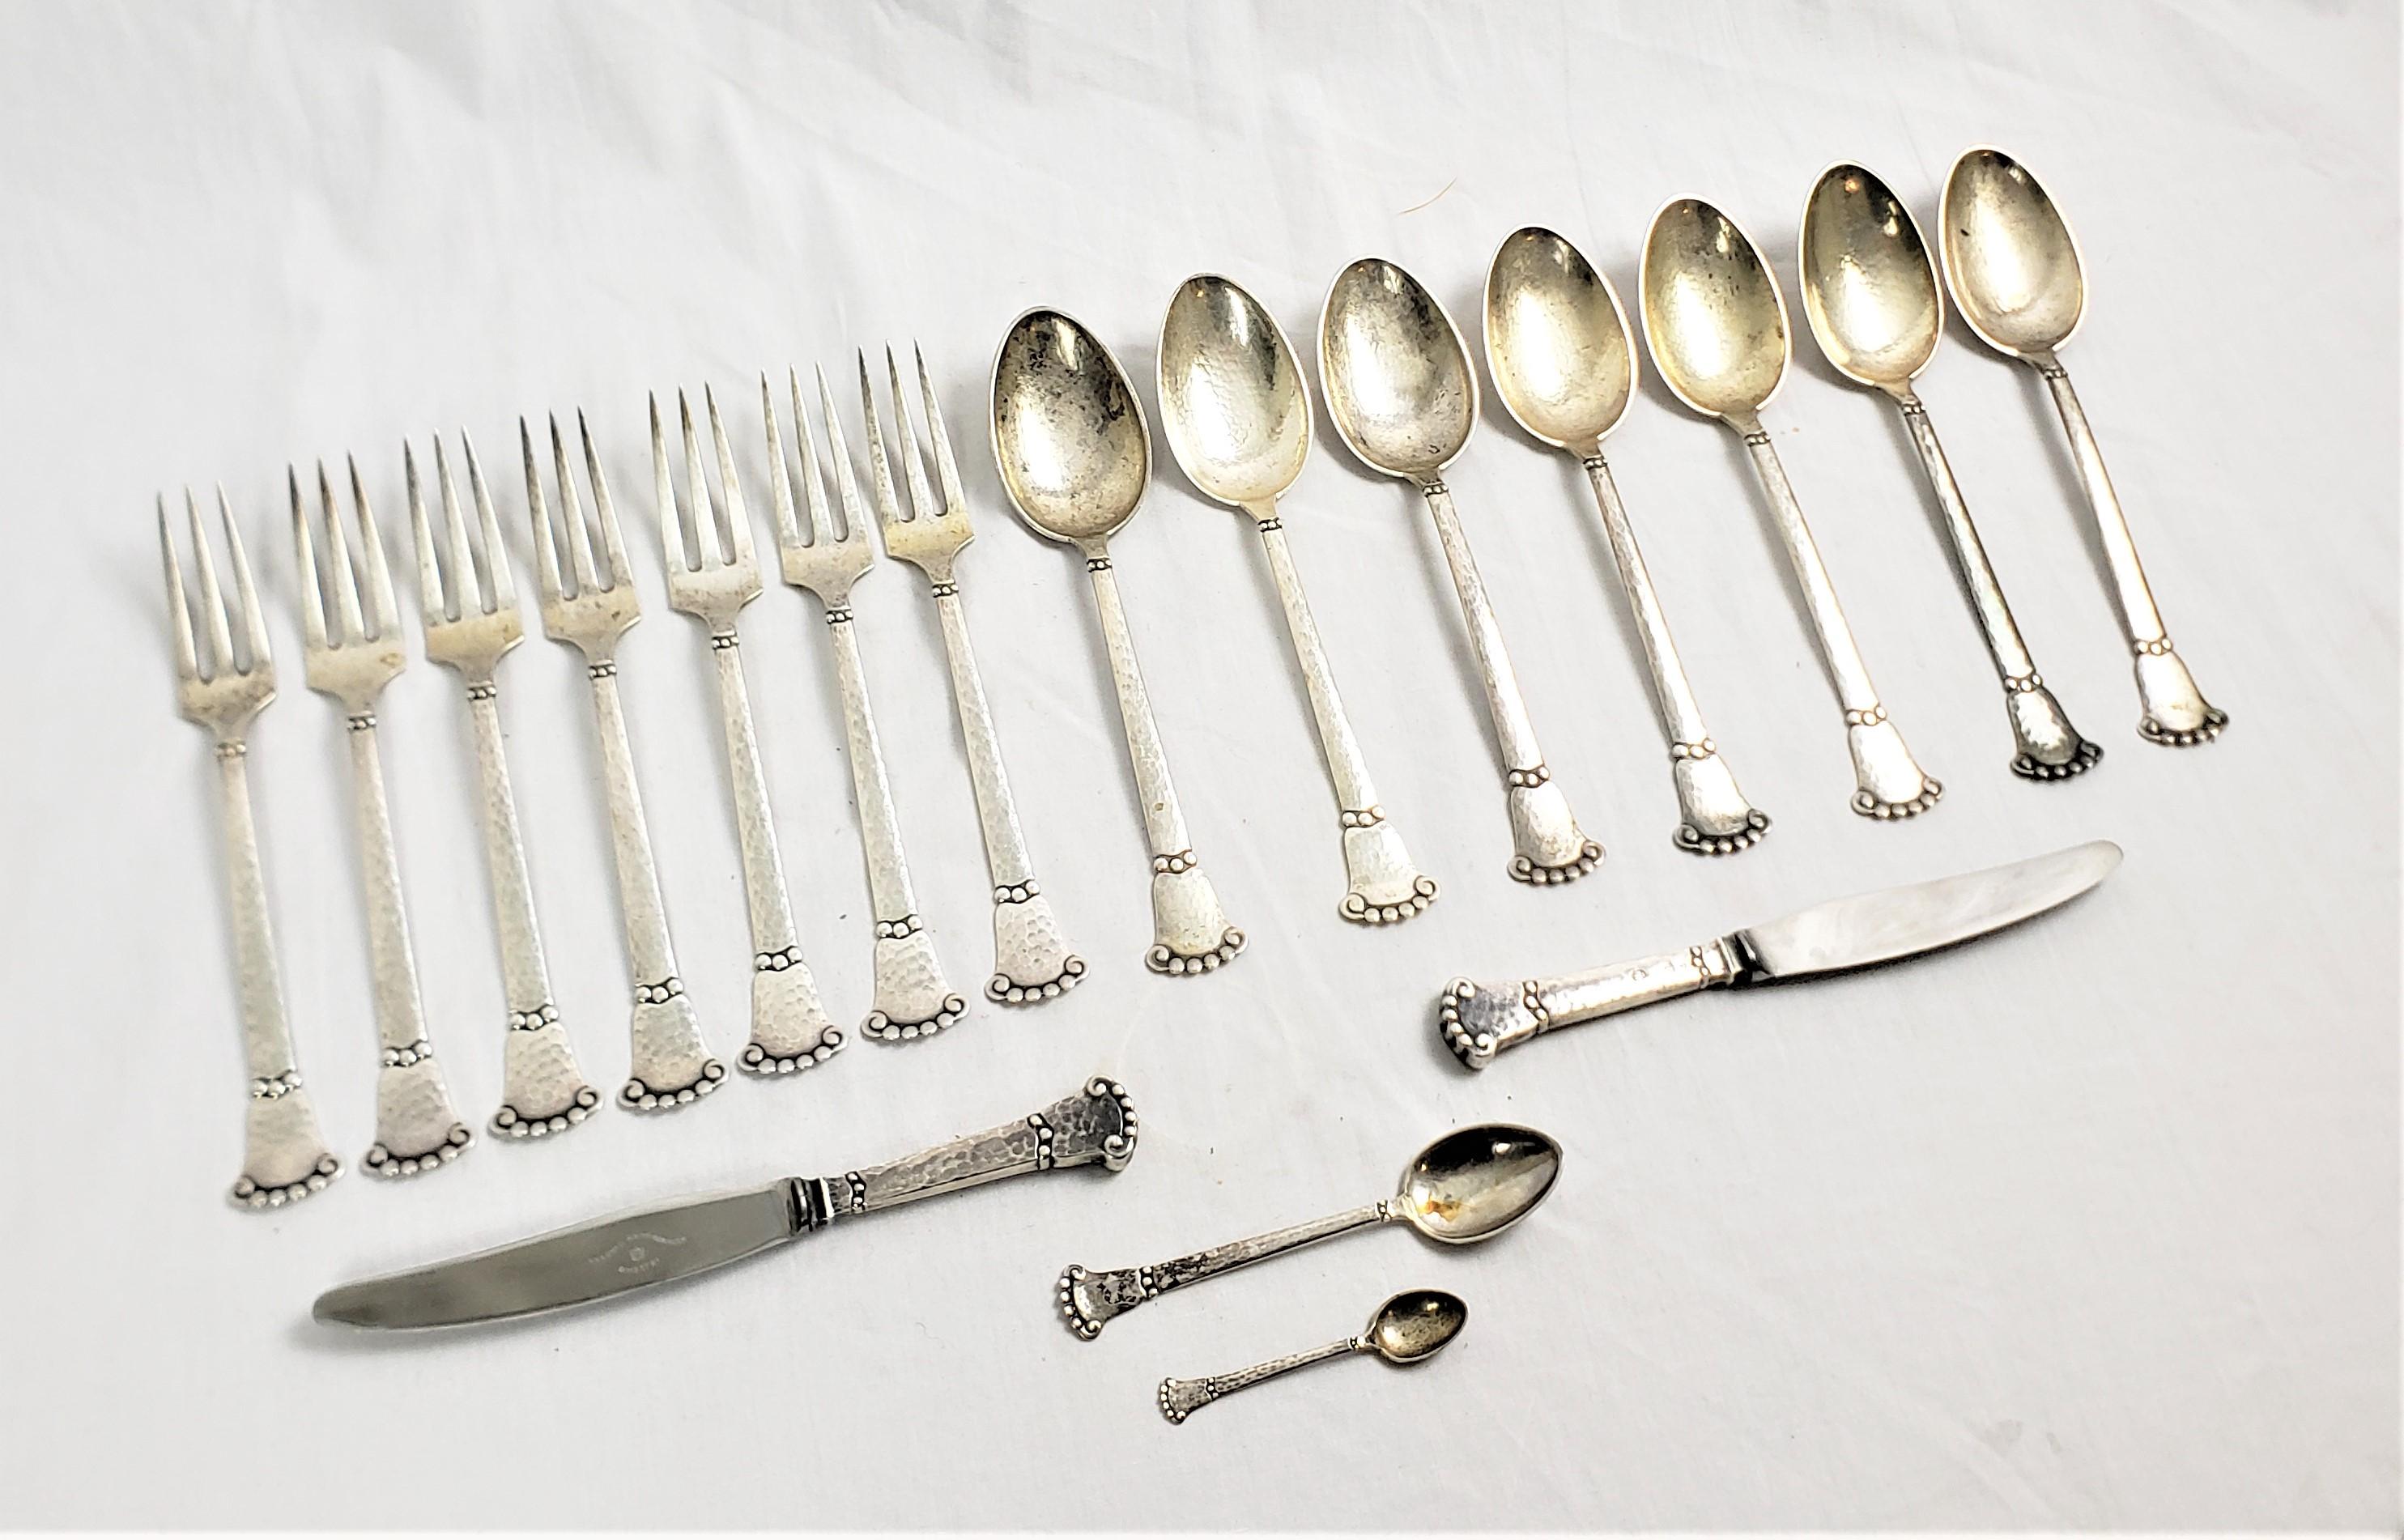 This eighteen piece set of flaware was made by the well known Christian F. Hiese of Denmark in approximately 1905 in the period Arts and Crafts style. This hand hammered set is composed of seven dinner forks, seven large soup spoons, two small